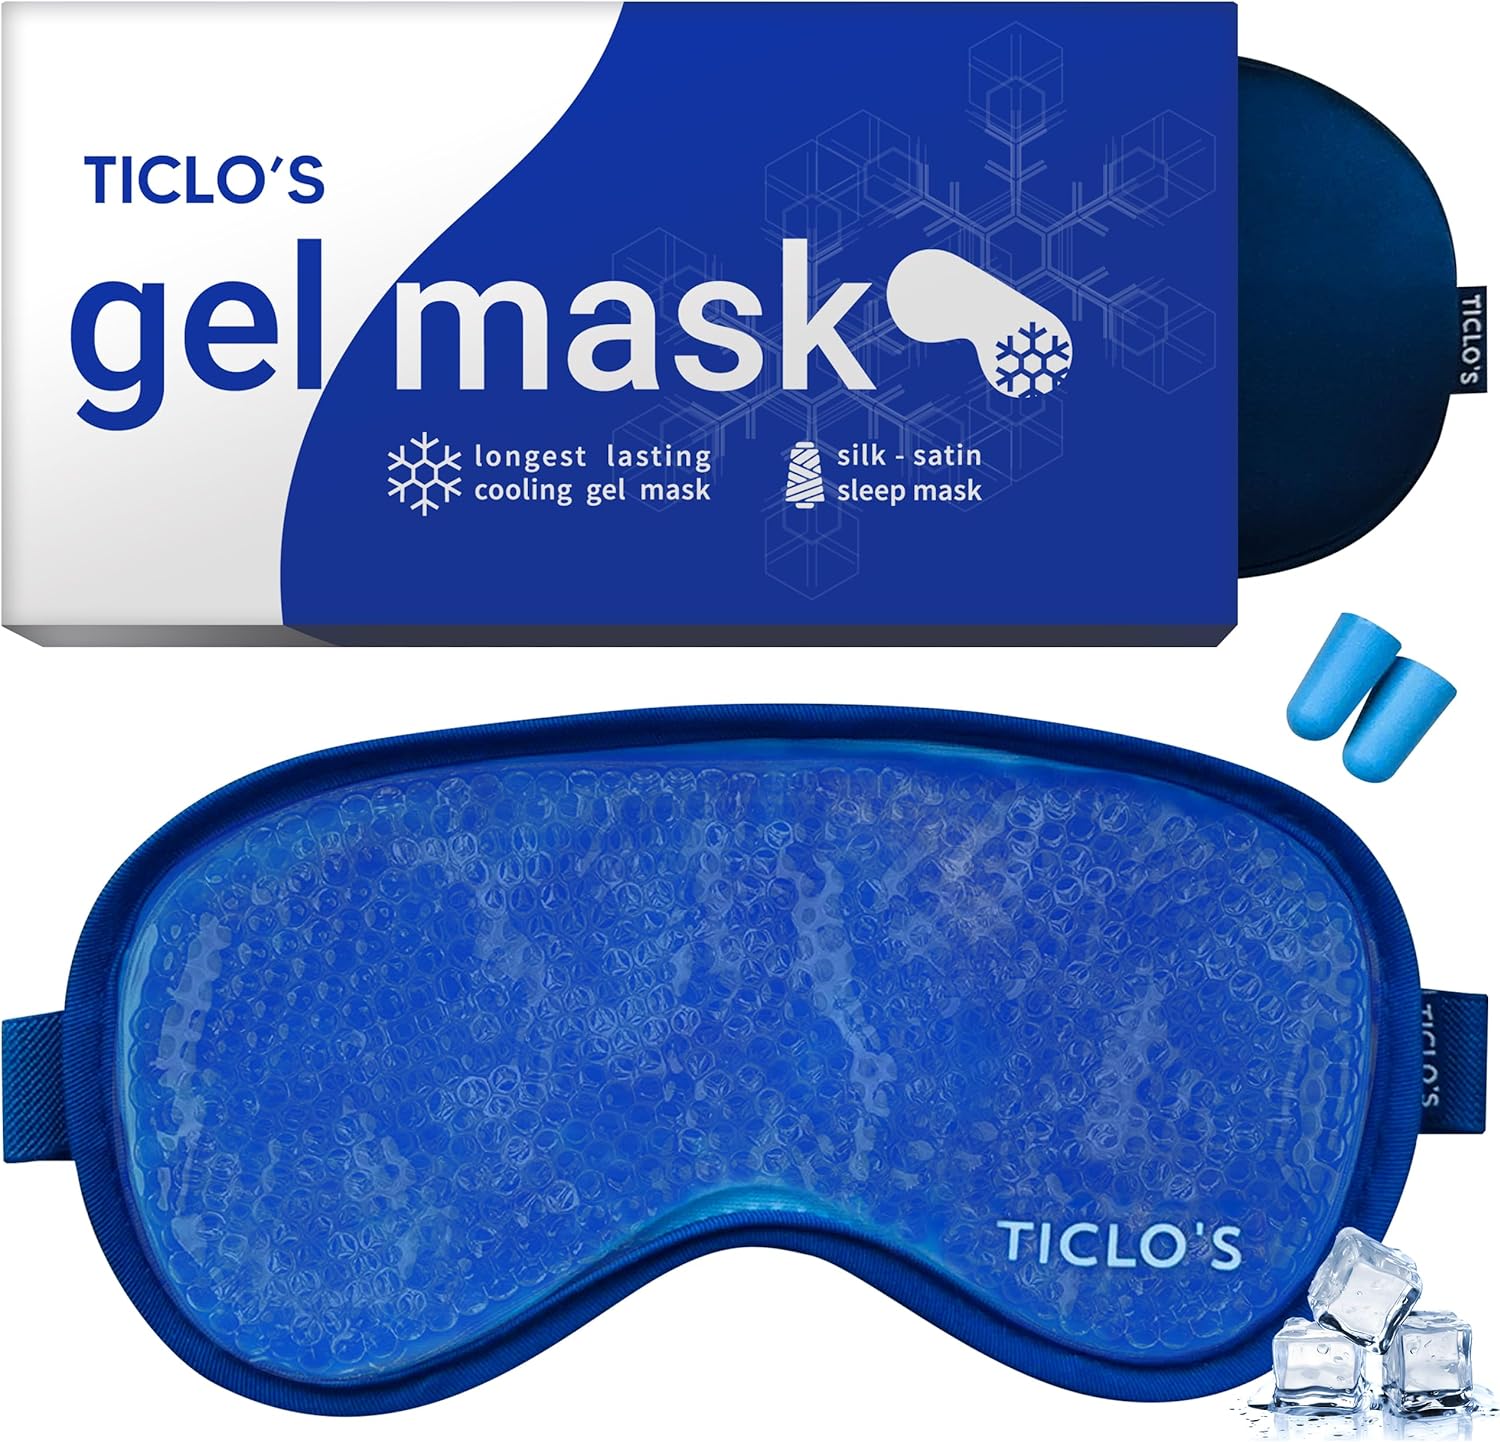 Cold packs are well made and work great. Very soft. Satin eye covers were also included which are very nice.